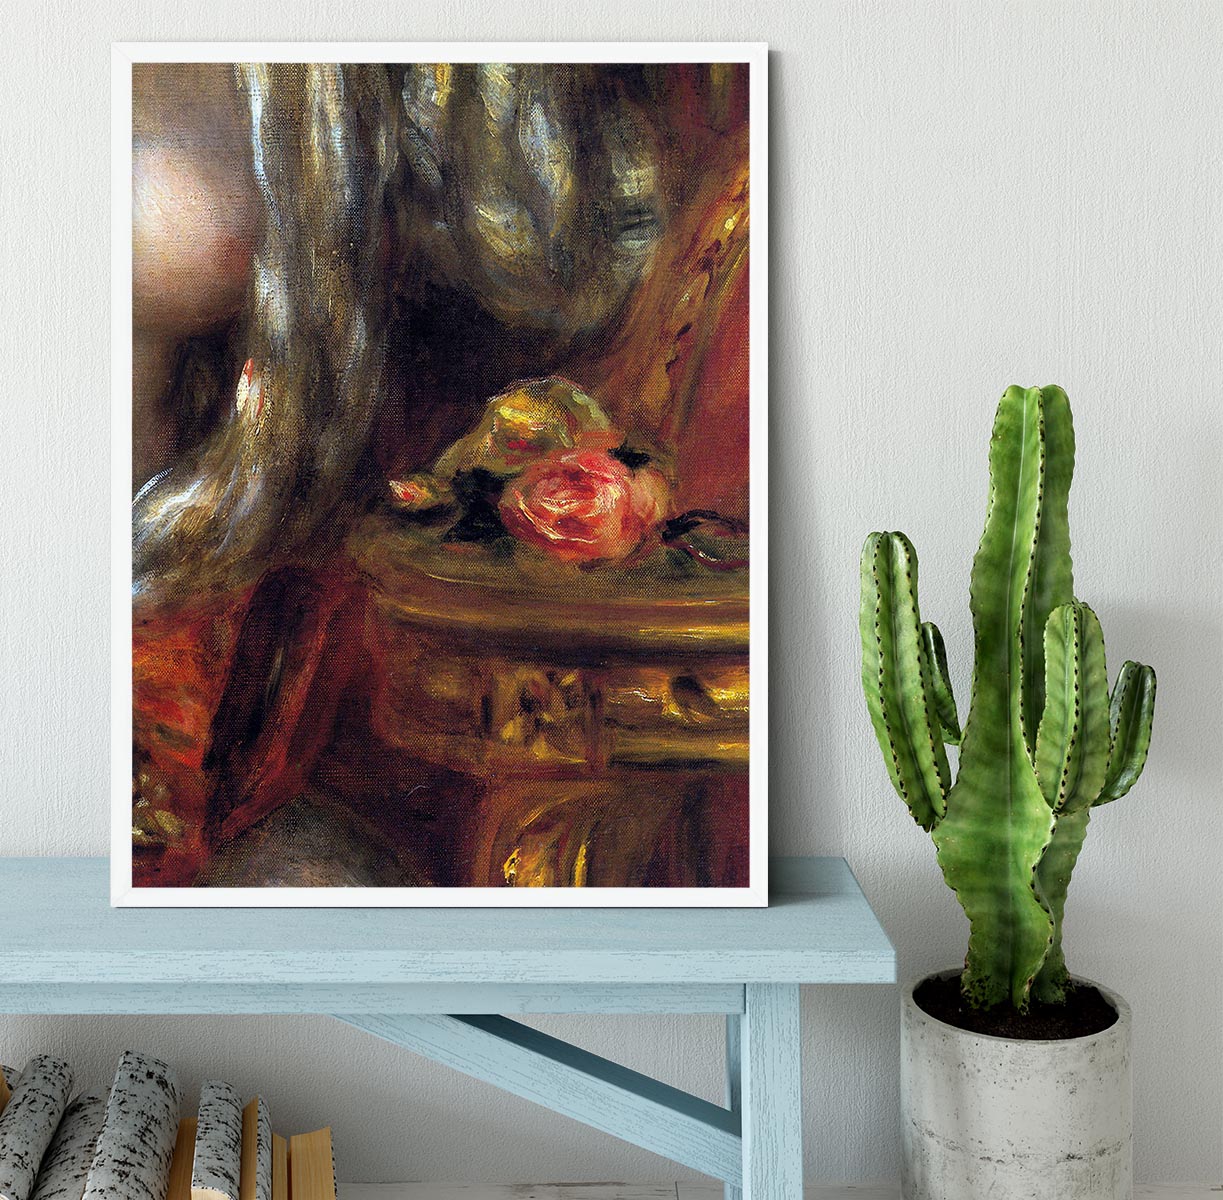 Gabrielle with jewels detail by Renoir Framed Print - Canvas Art Rocks -6